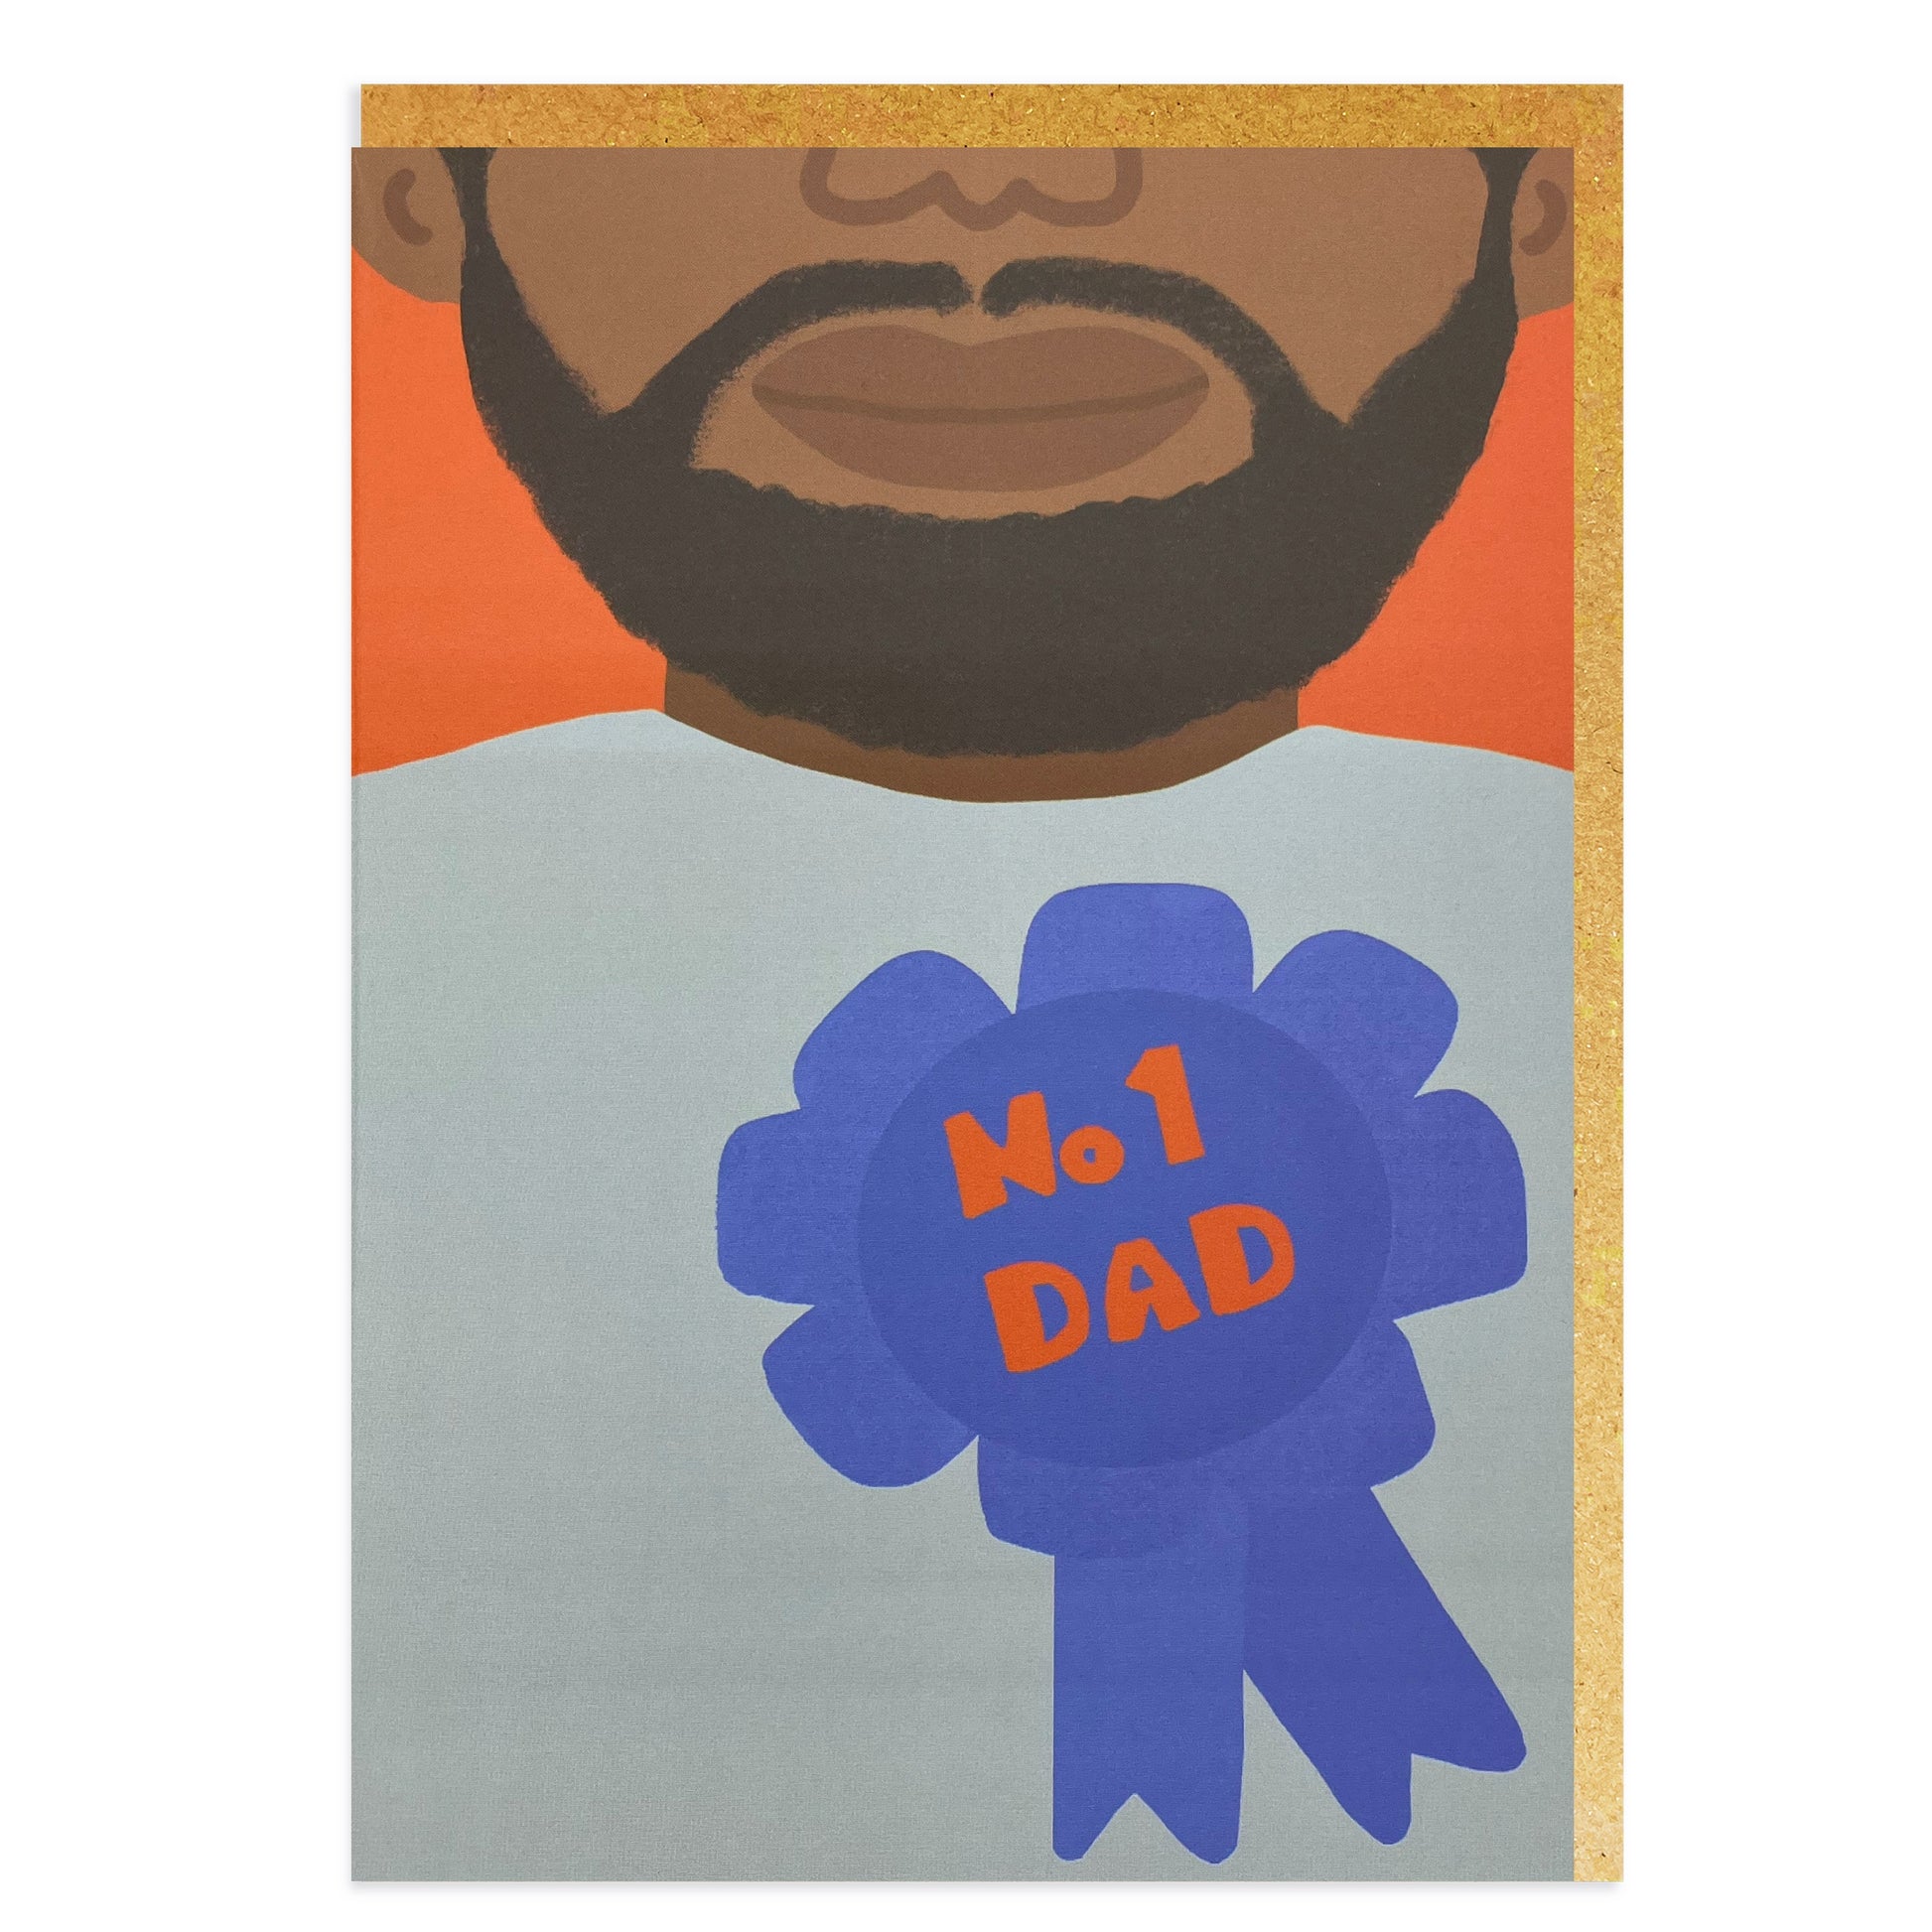 Black Father's Day,  Black Birthday Card. Contemporary cards